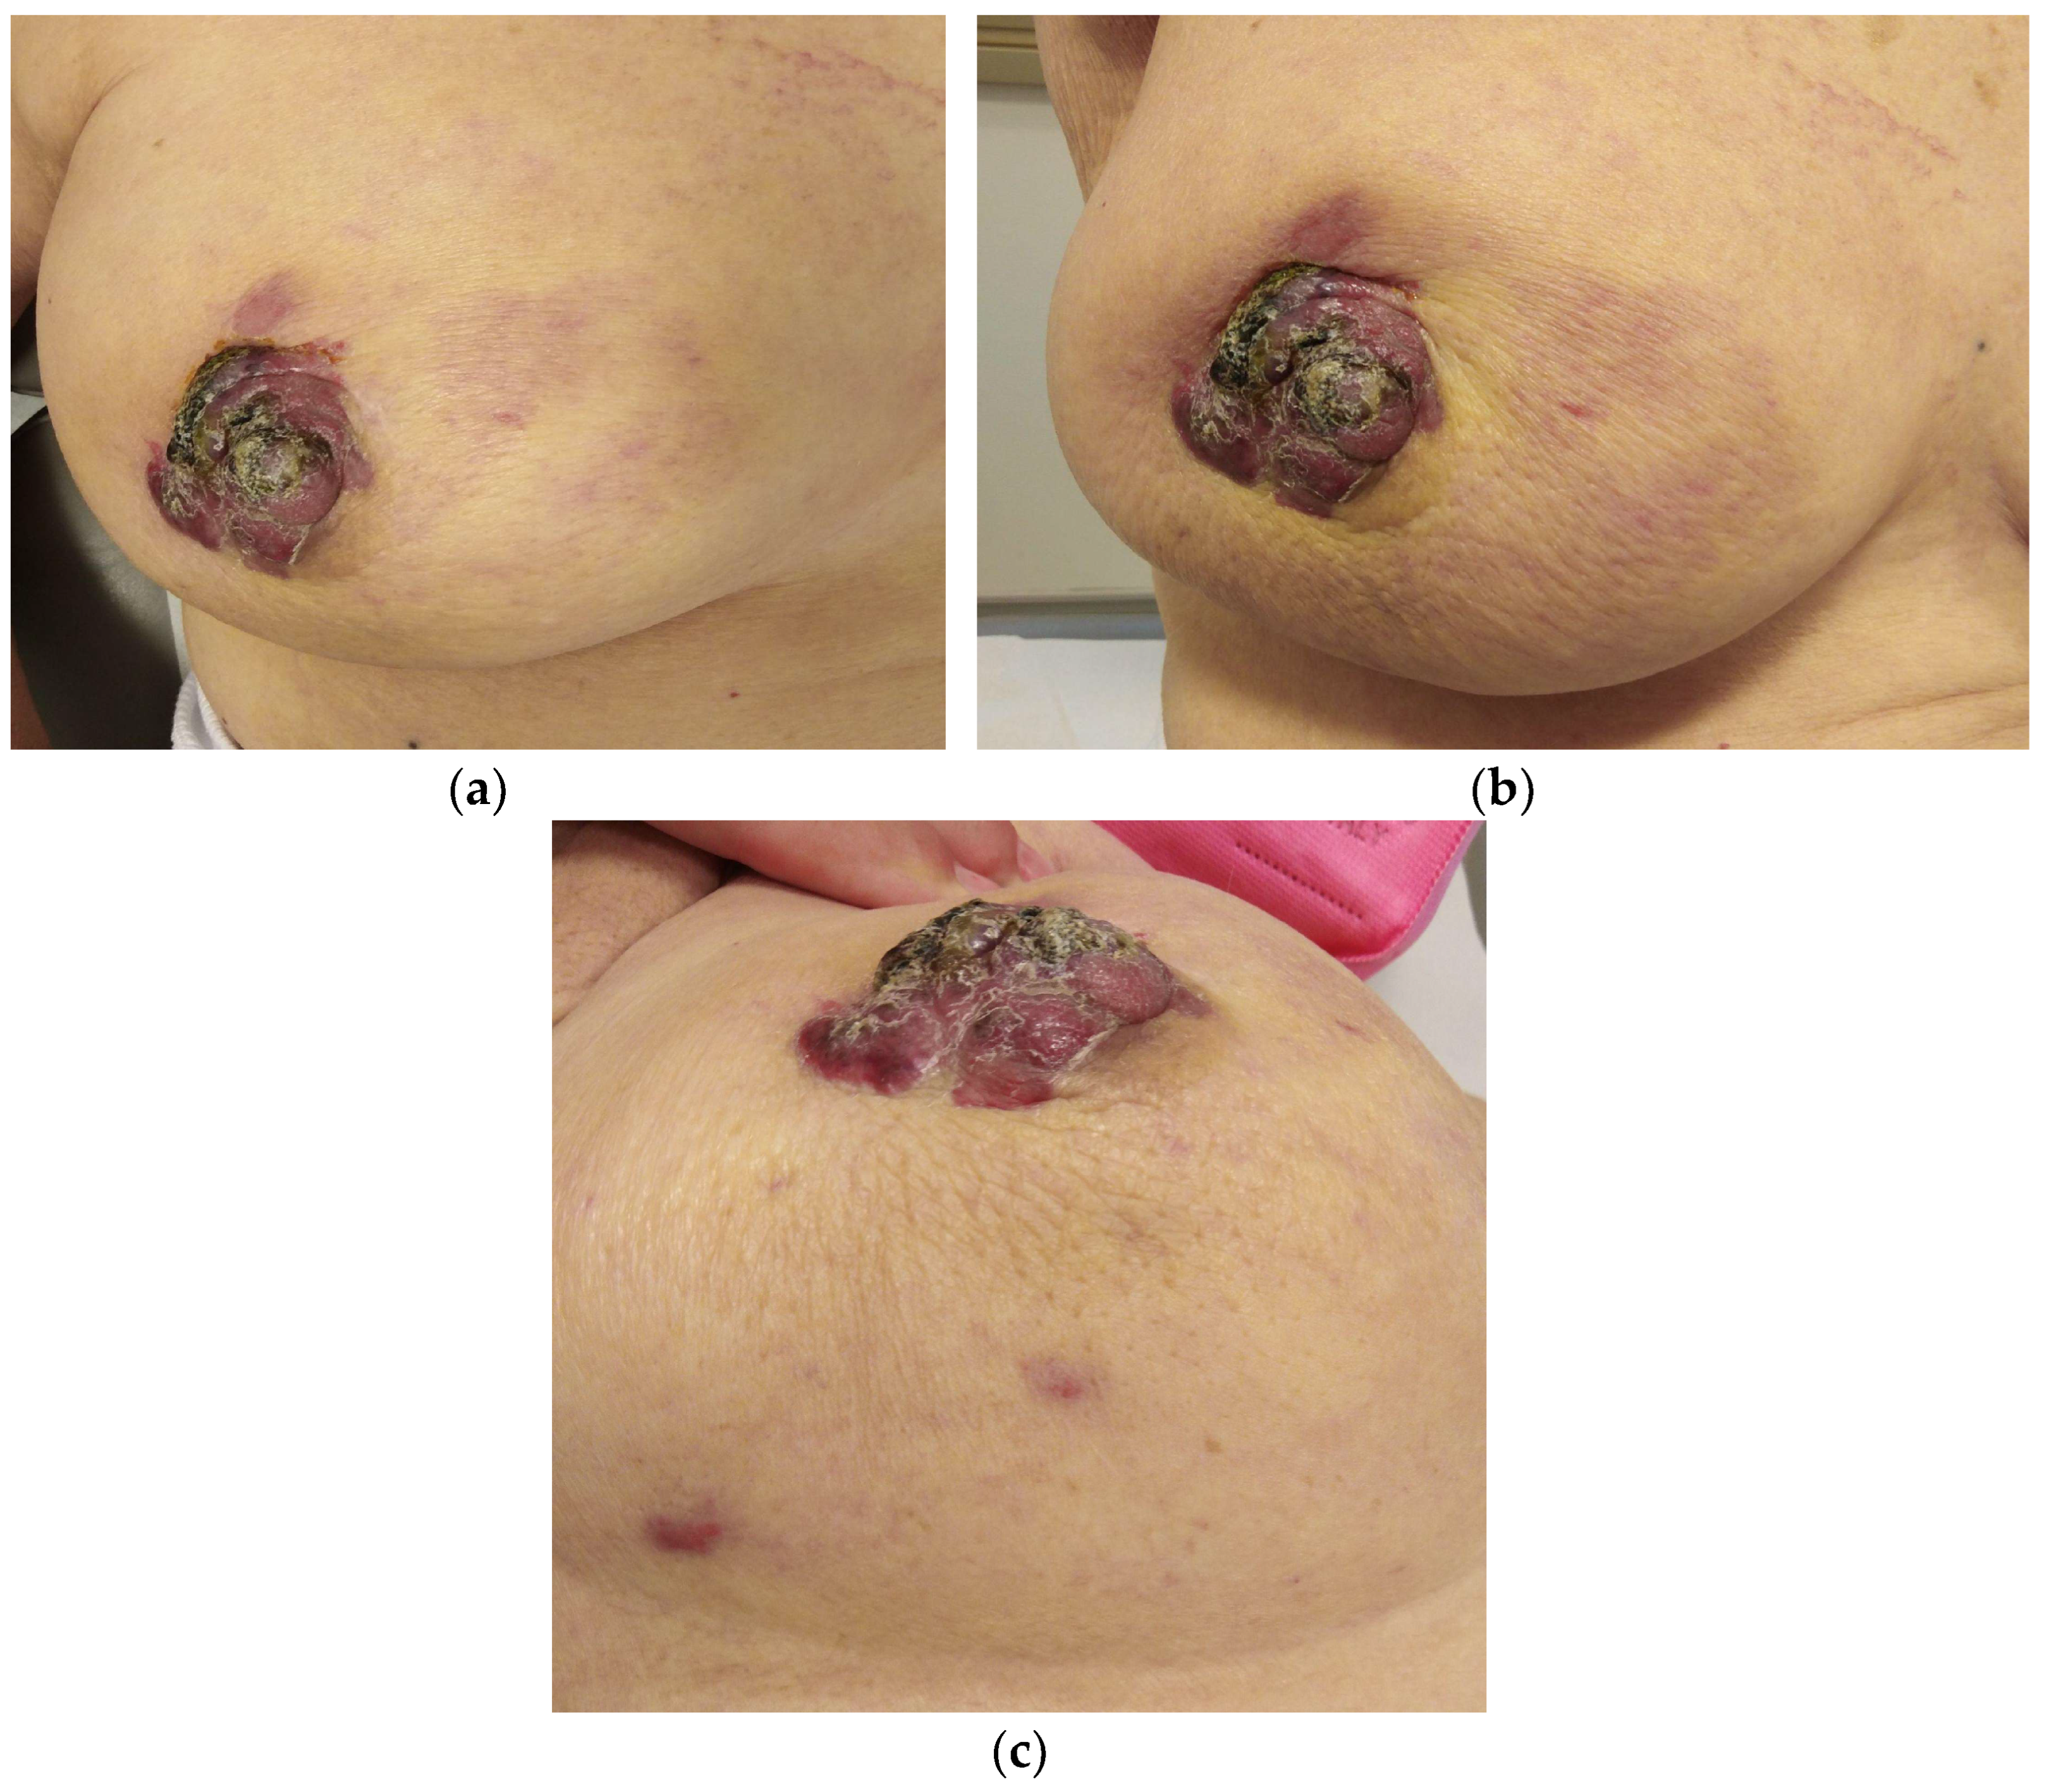 Axillary manifestations of dermatologic diseases: a focused review